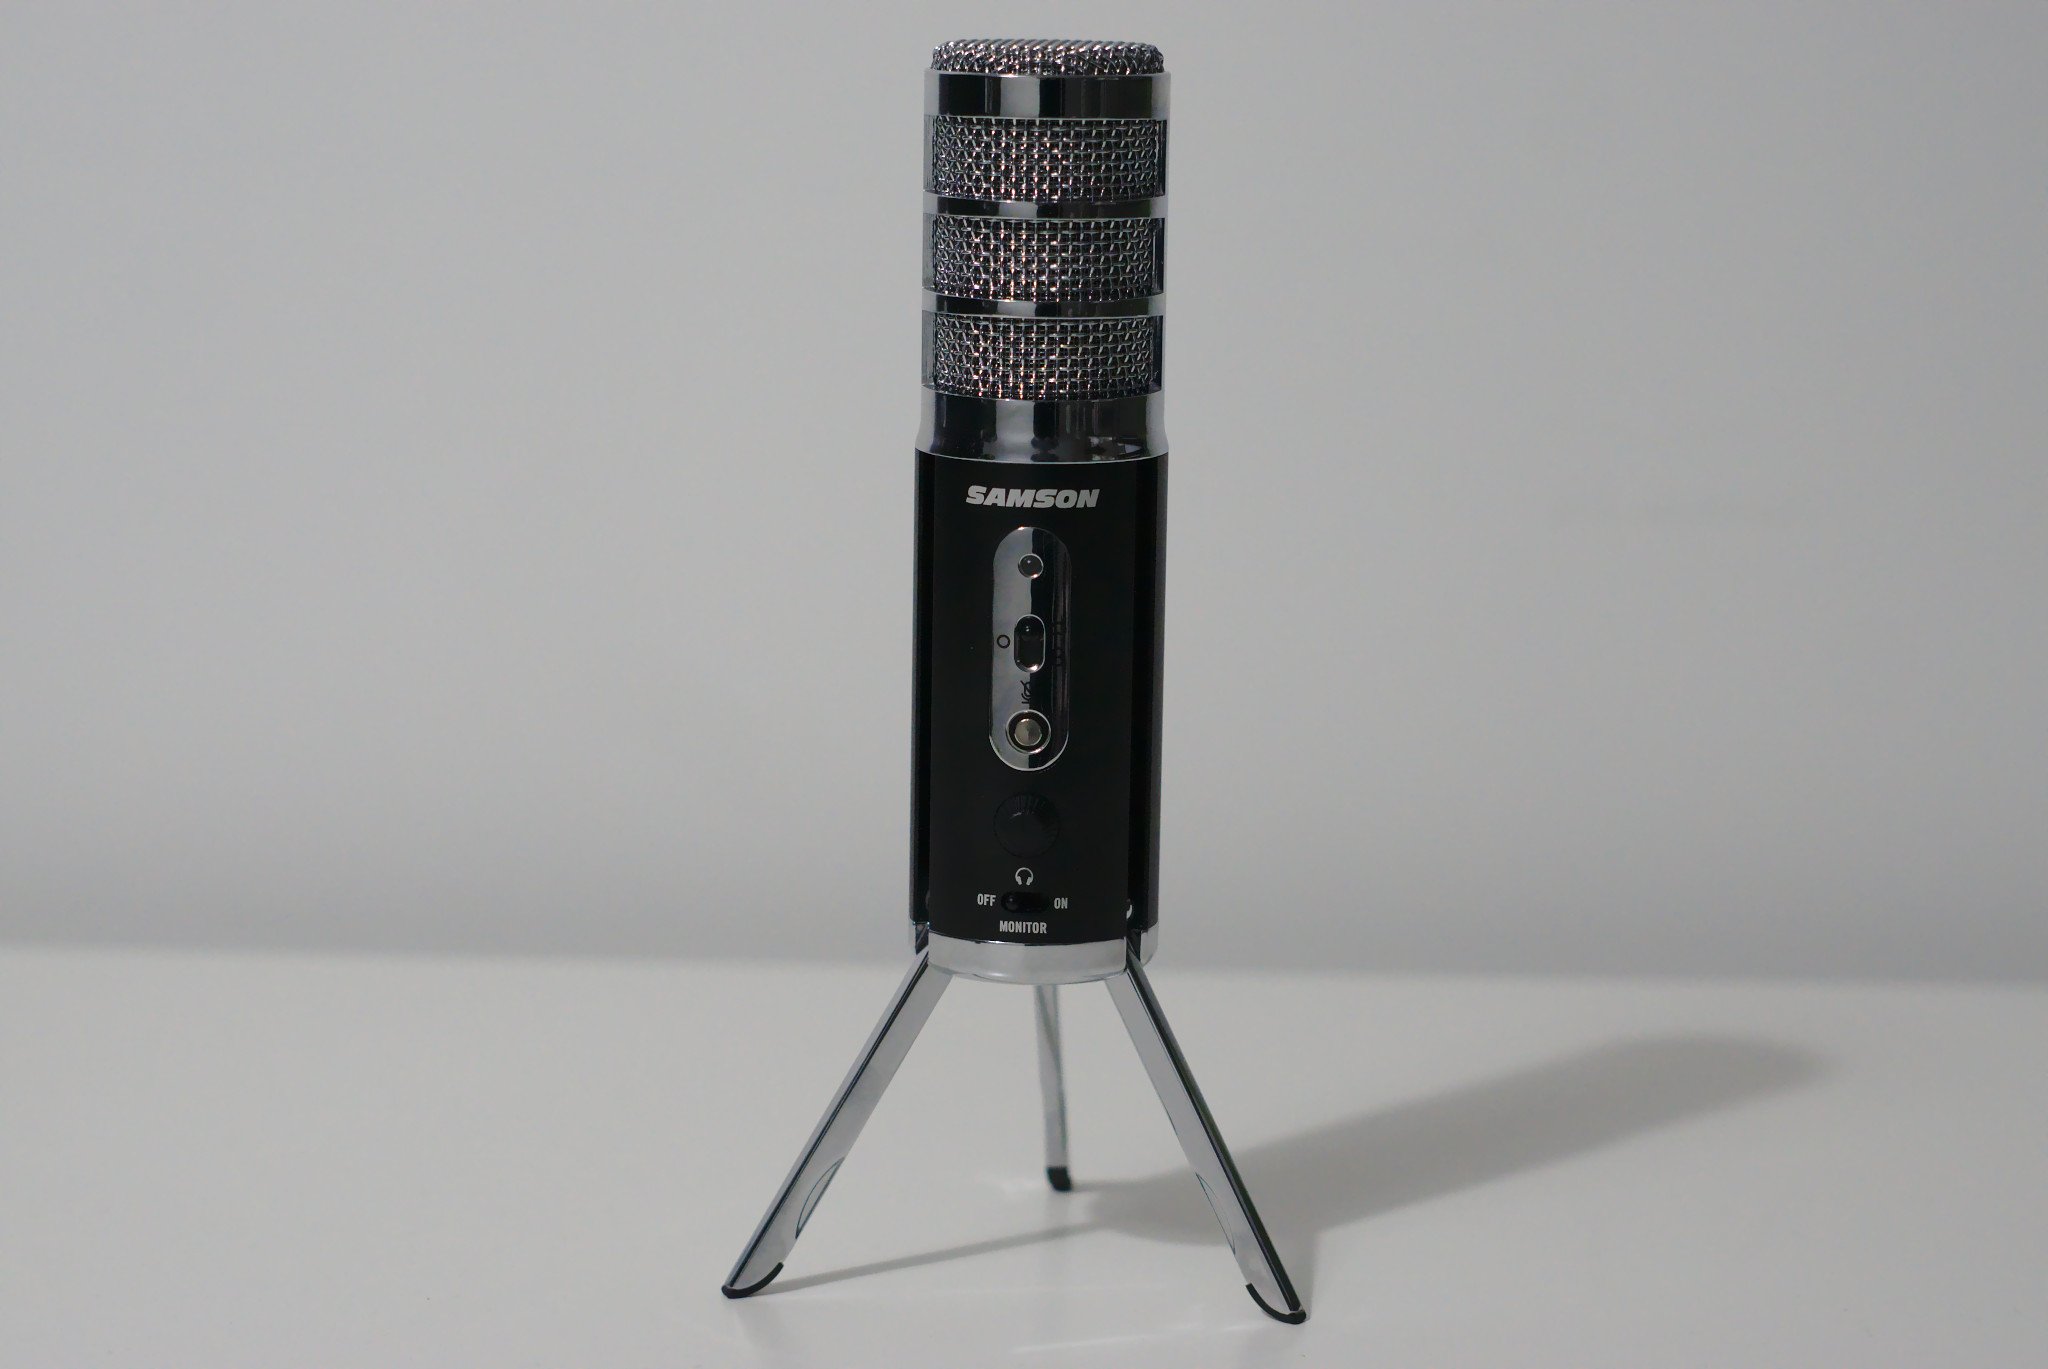 Samson Satellite Review A Great Portable Mic For Streaming And